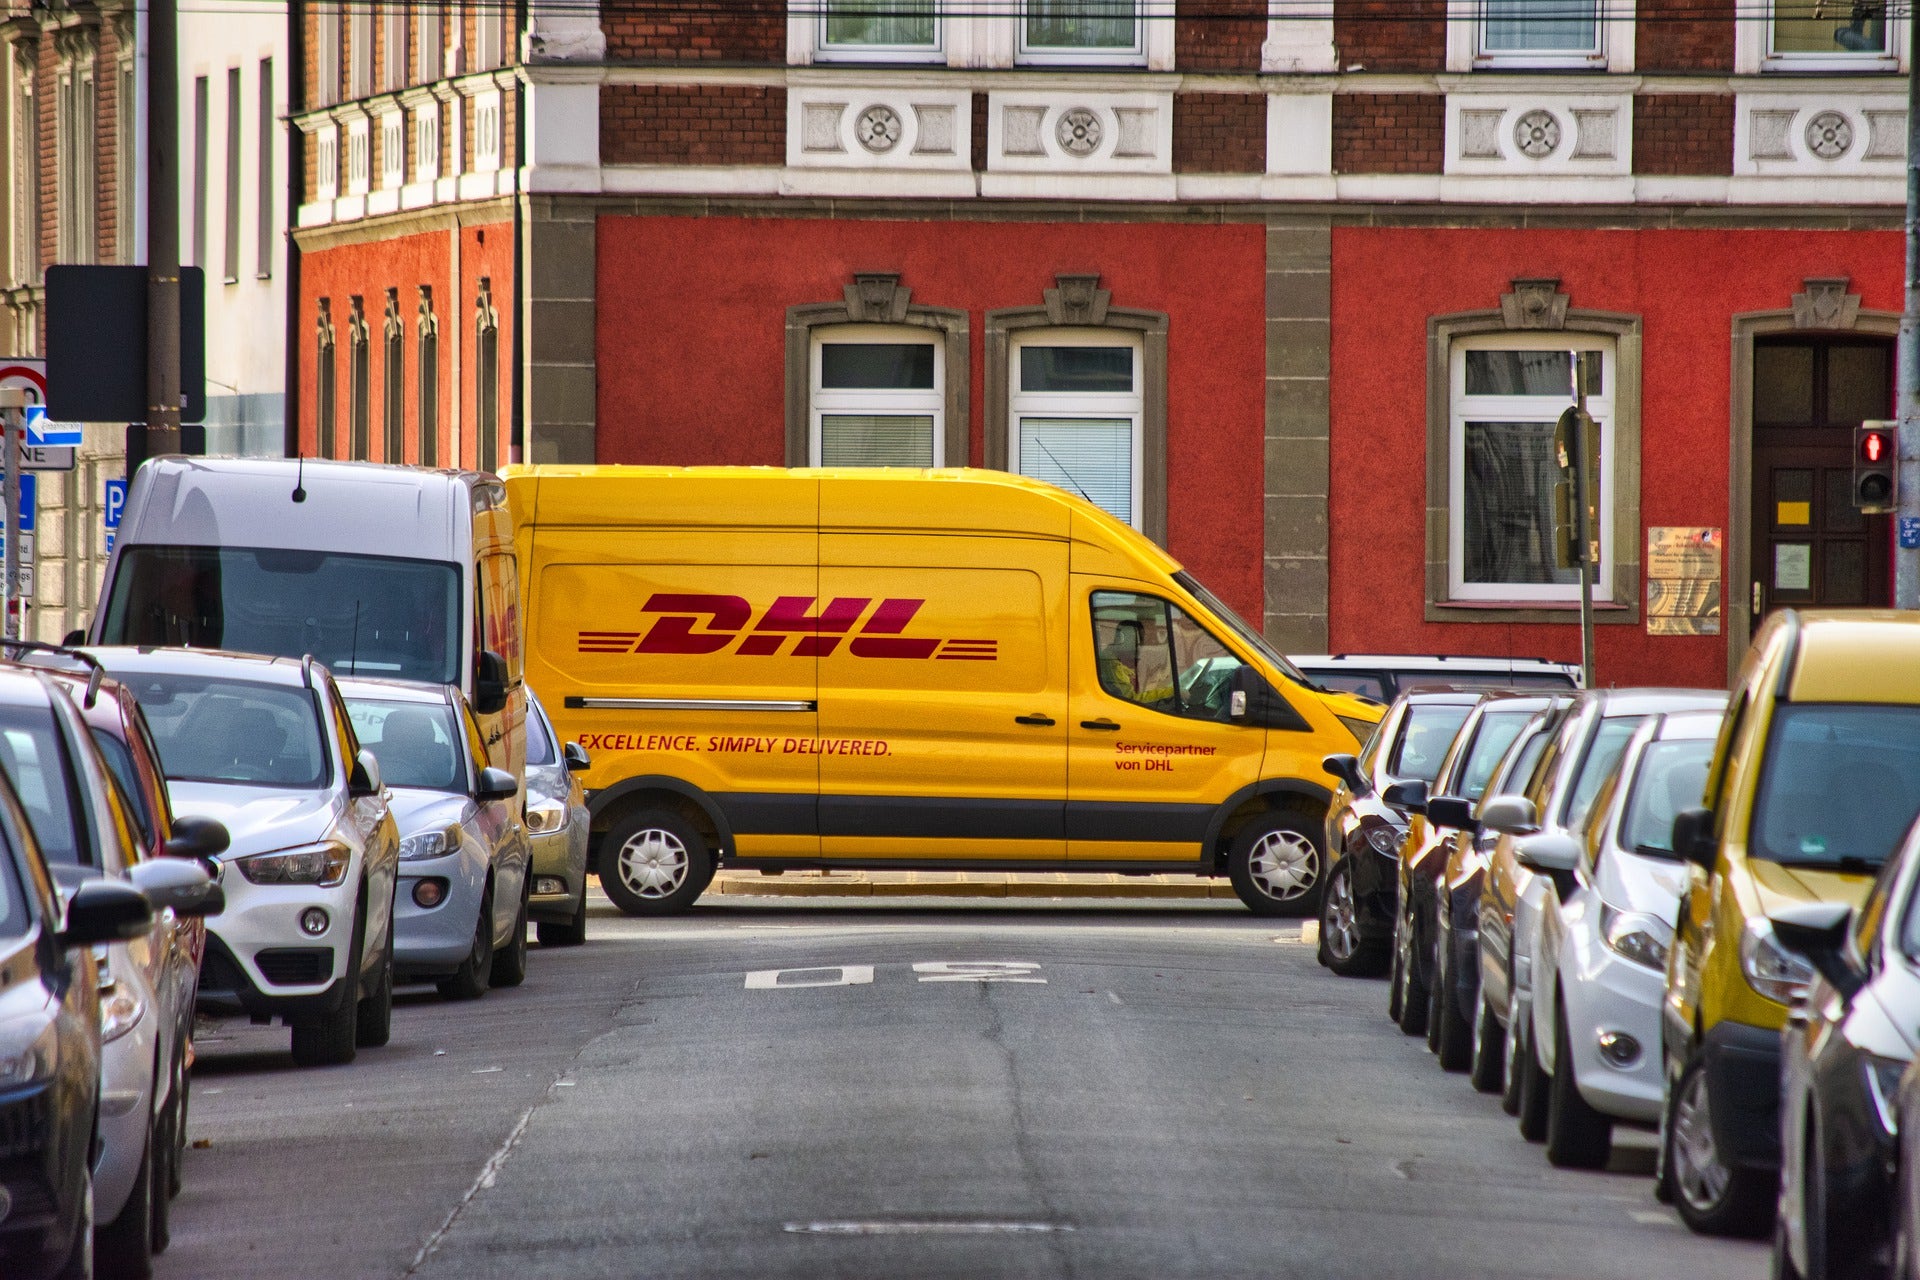 DHL Pulling Its Parcelcopter Drone, Ceasing Drone Development